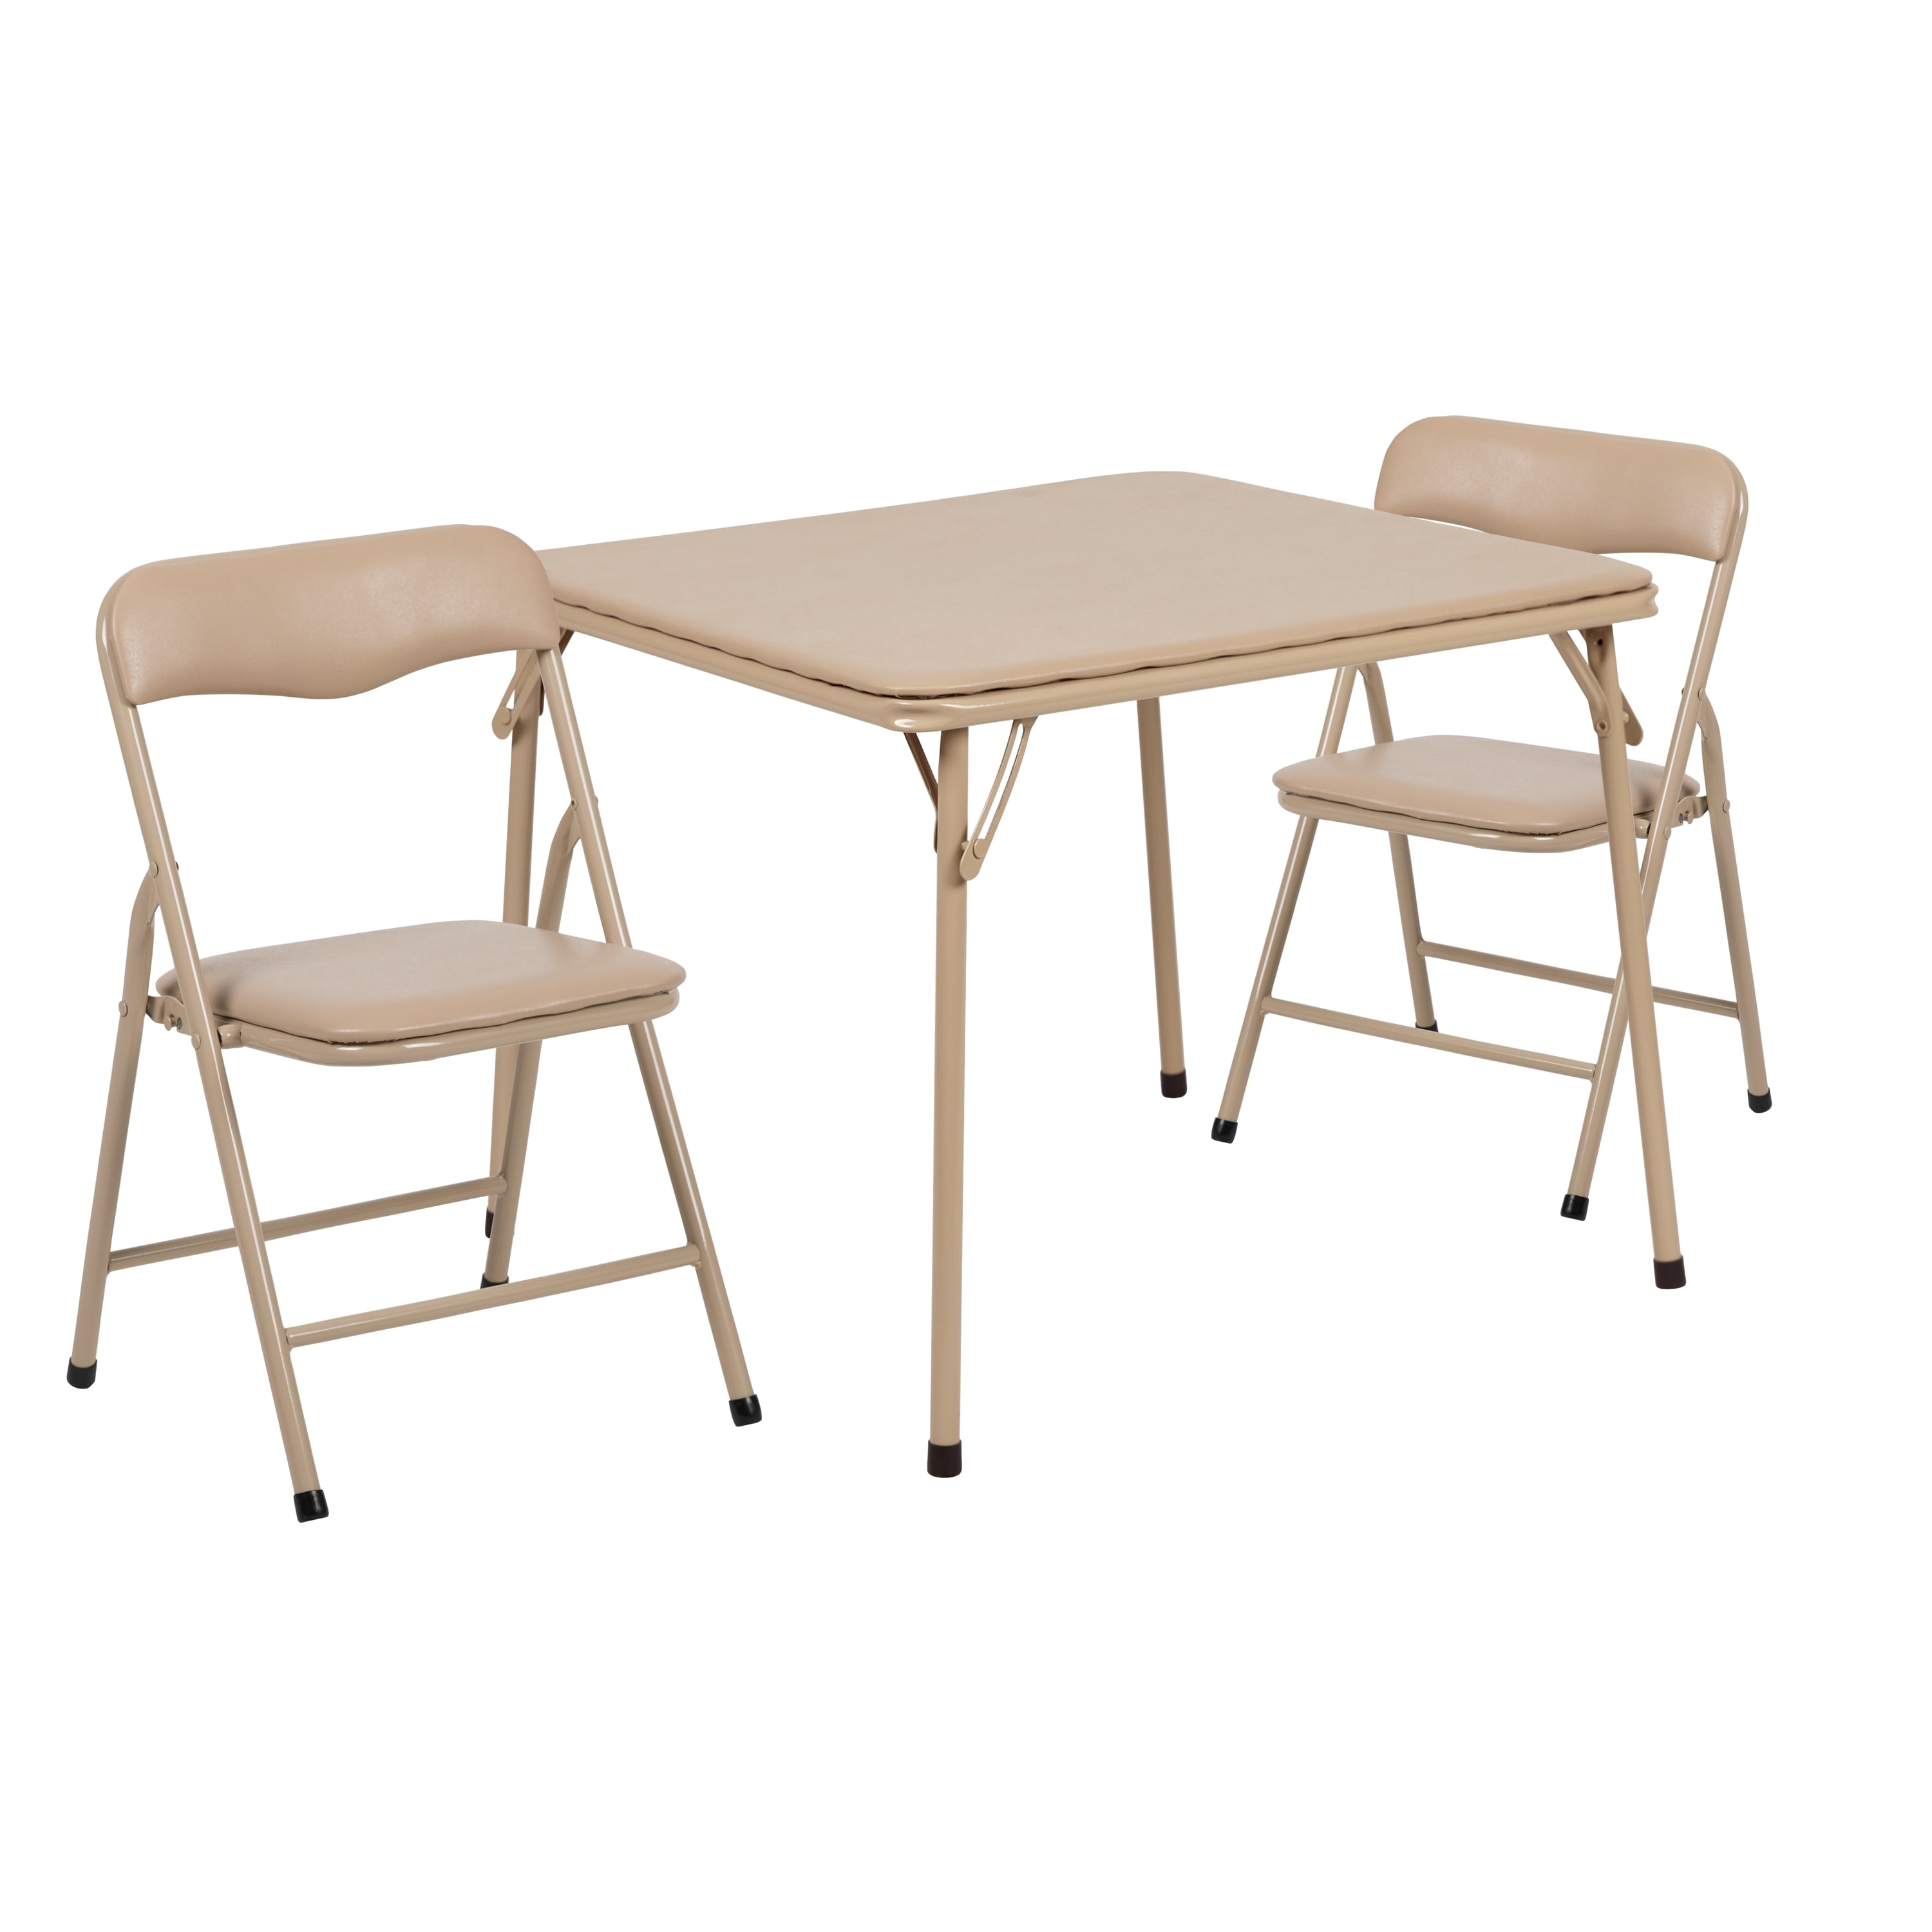 walmart childrens folding table and chairs